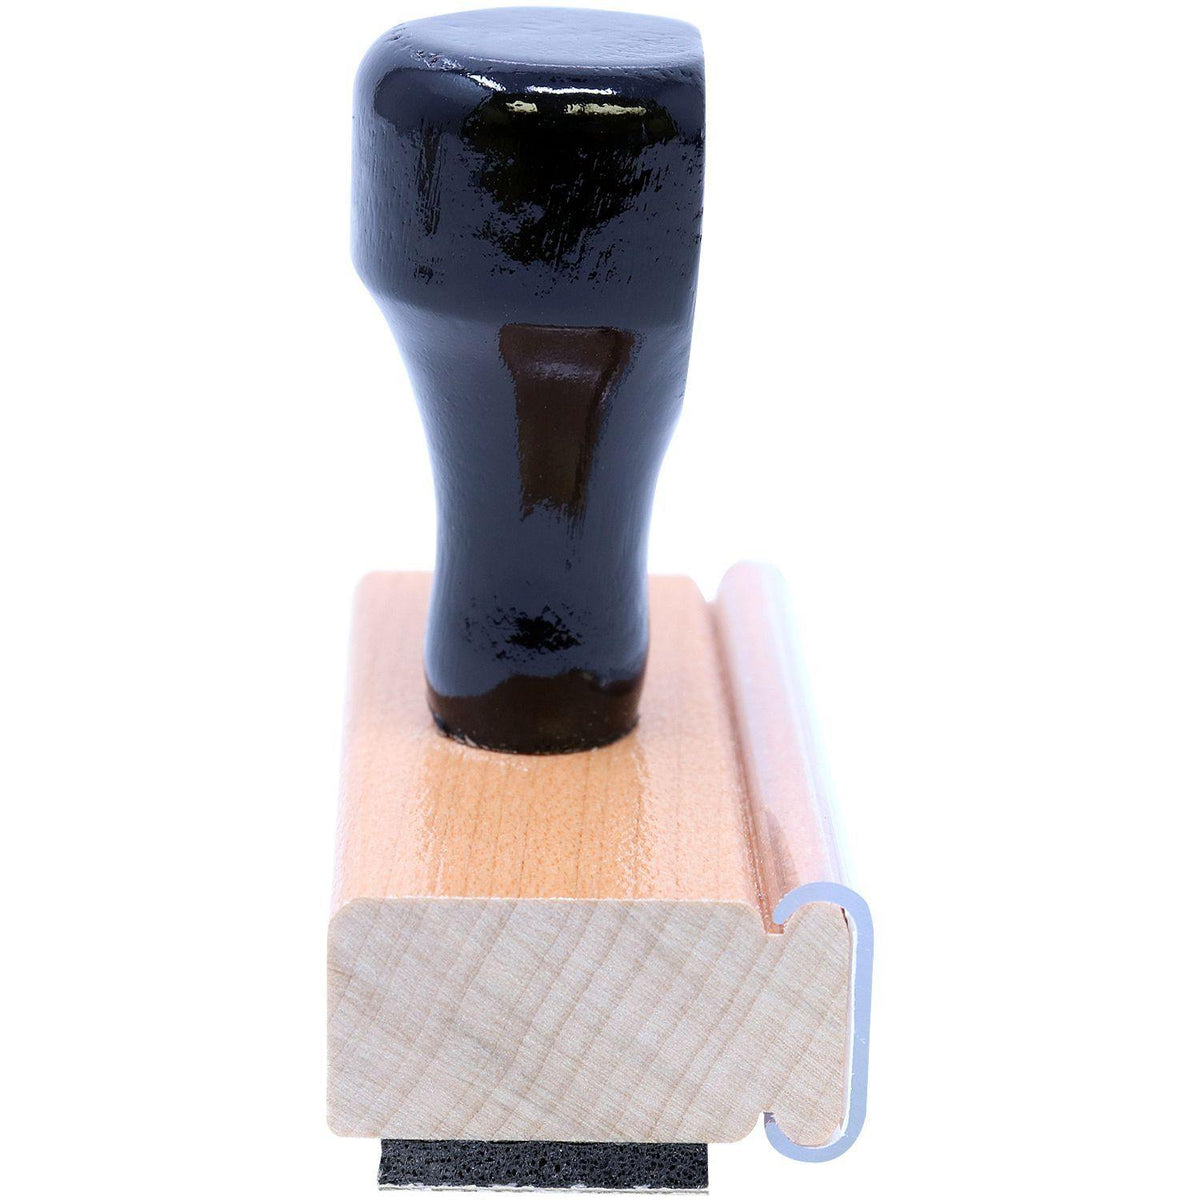 nCov Rubber Stamp - Engineer Seal Stamps - Brand_Acorn, Impression Size_Small, Stamp Type_Regular Stamp, Type of Use_Medical Office